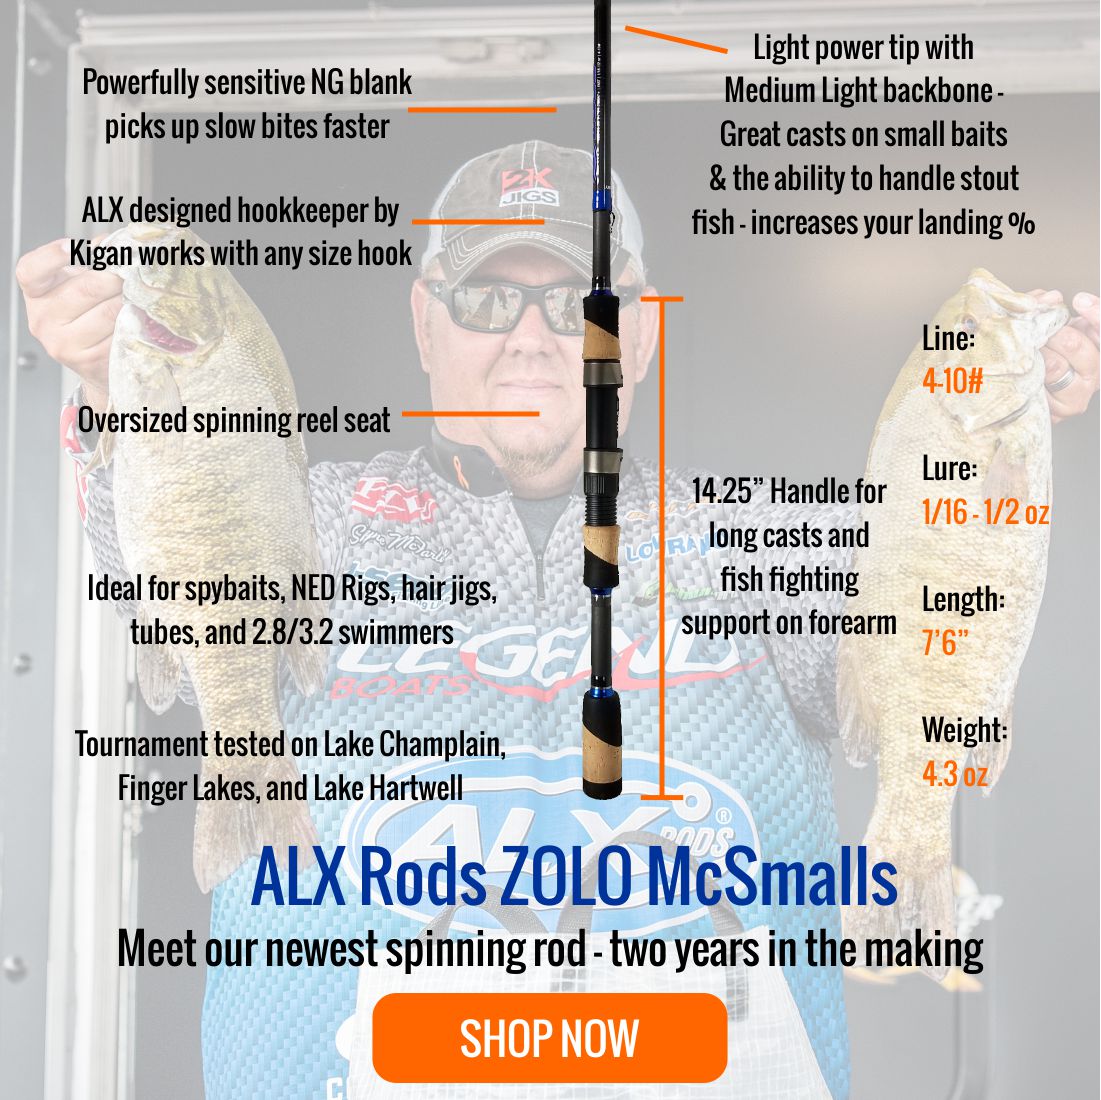 ZOLO McSmalls - 7'6, Light+, Fast Spinning - ALX Rods